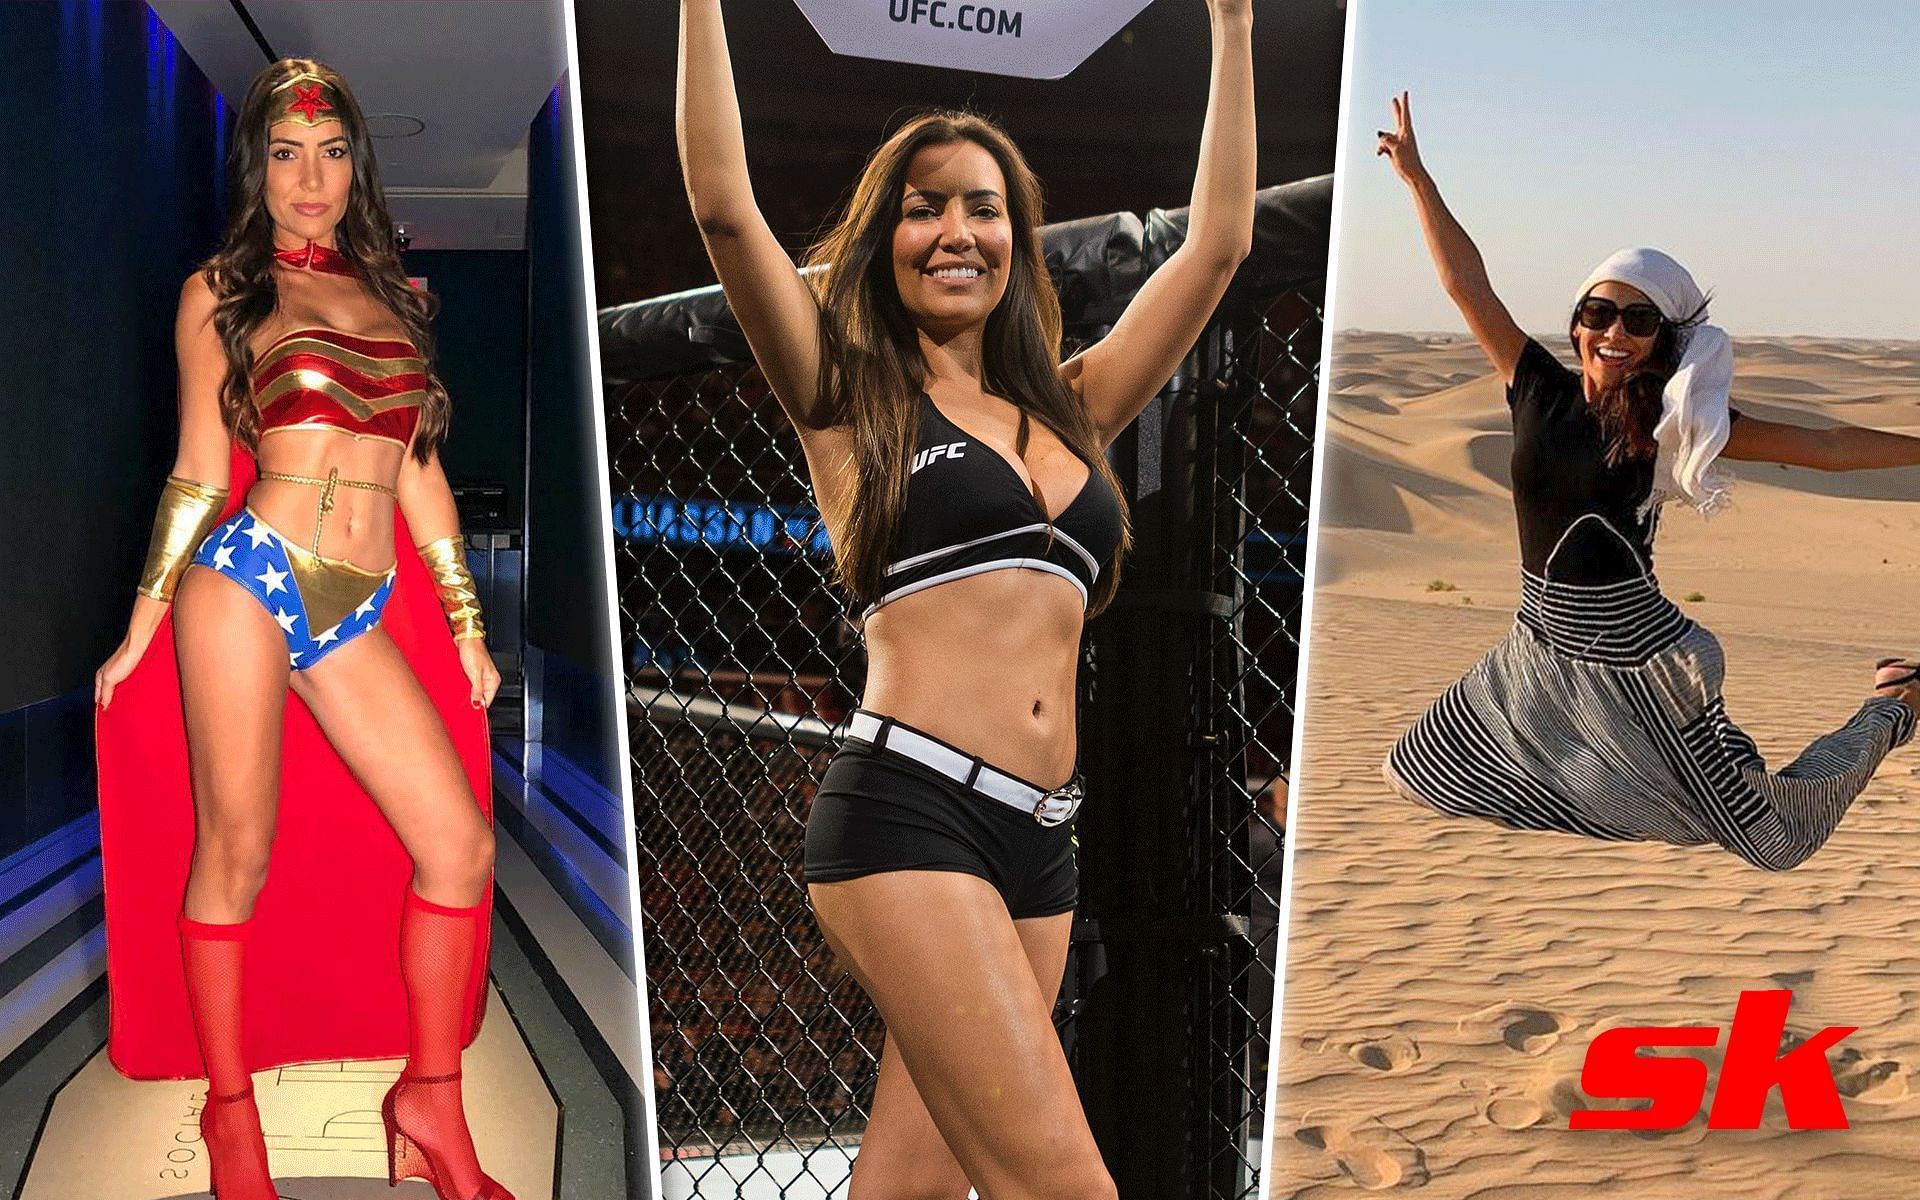 Luciana Andrade is one of the most popular ring girls in the UFC [Image credits: @lucianaandrade on Instagram]